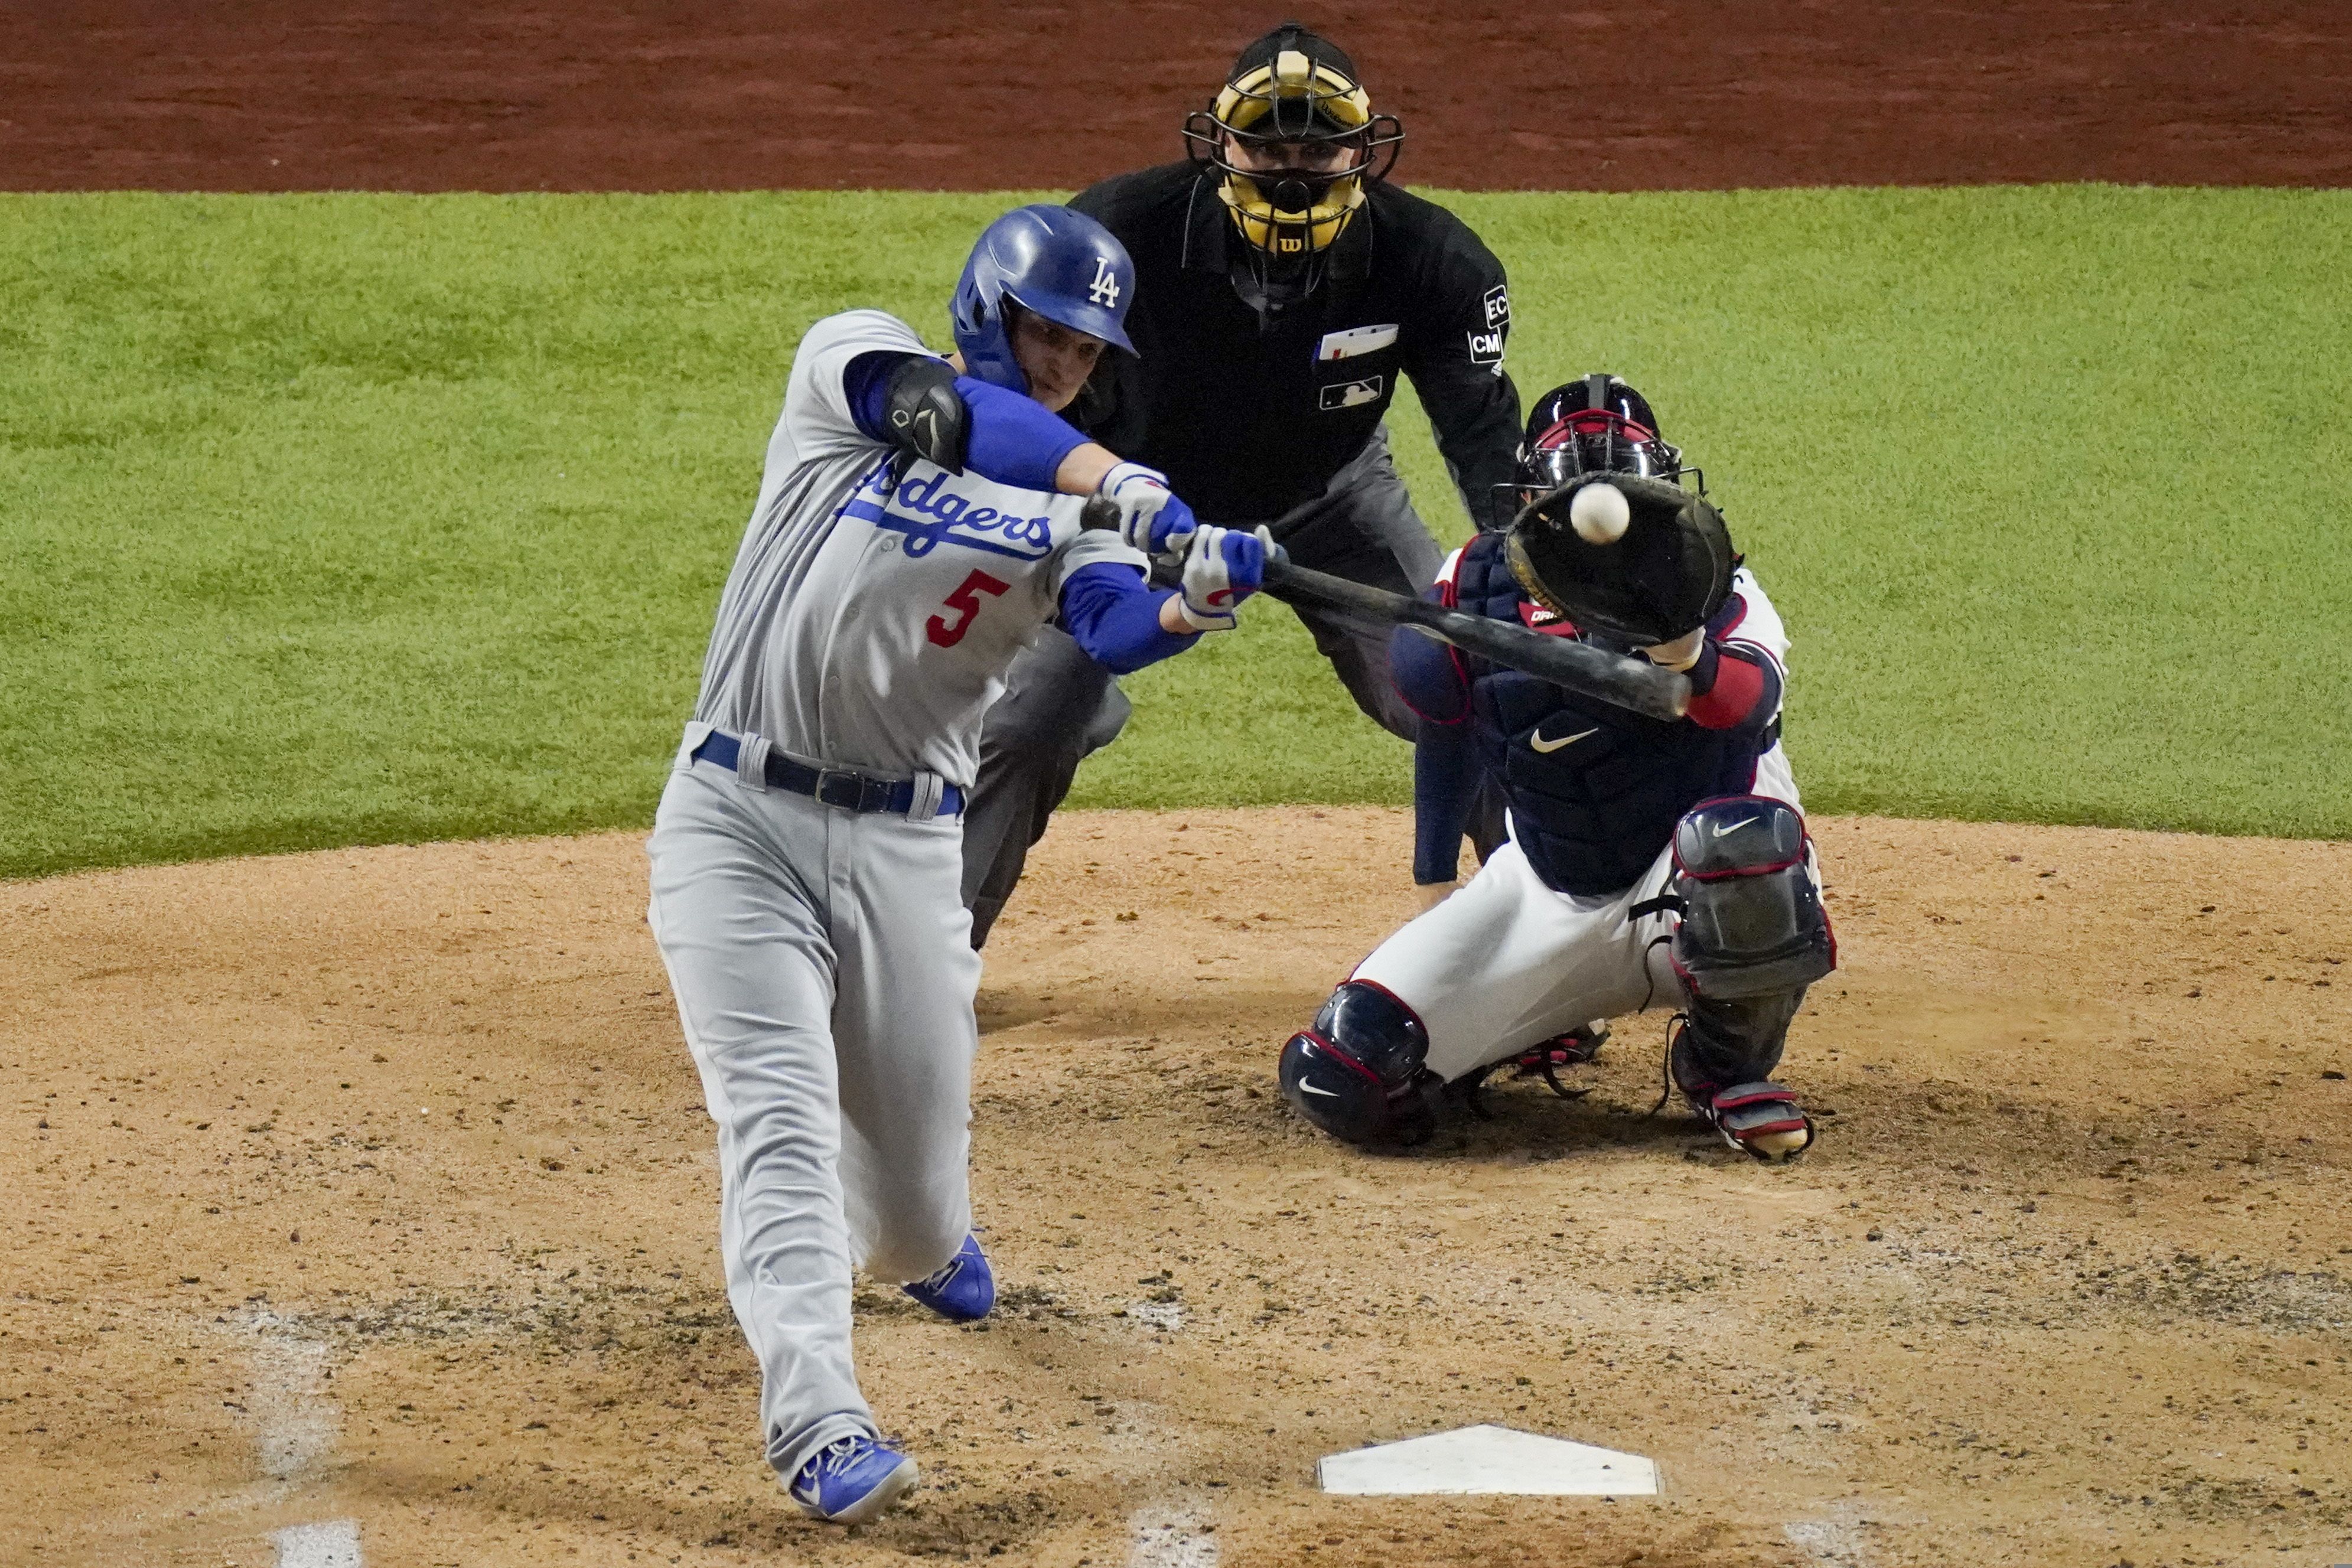 Dodgers' Corey Seager making history in NLCS